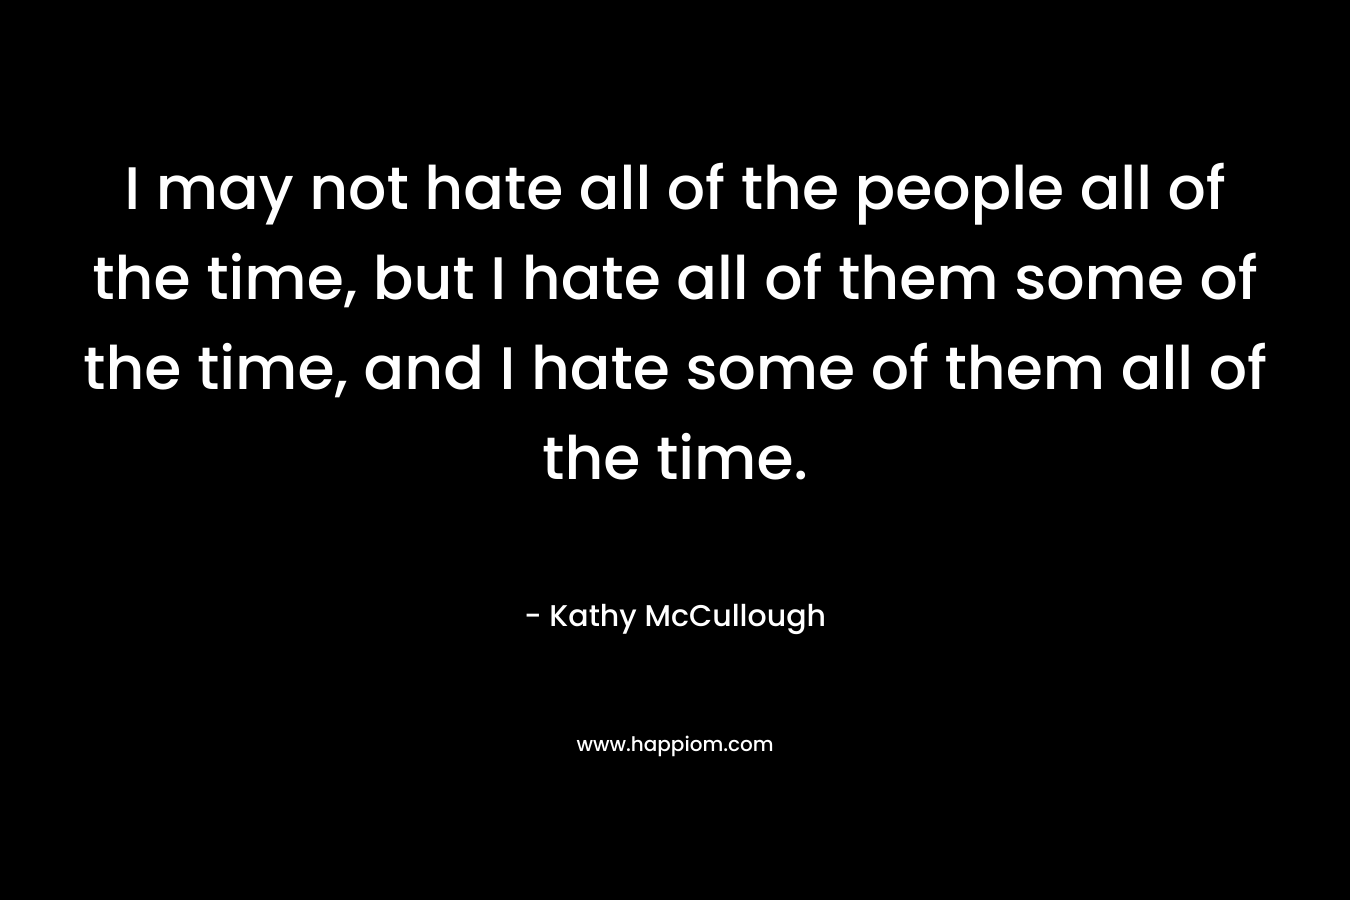 I may not hate all of the people all of the time, but I hate all of them some of the time, and I hate some of them all of the time.